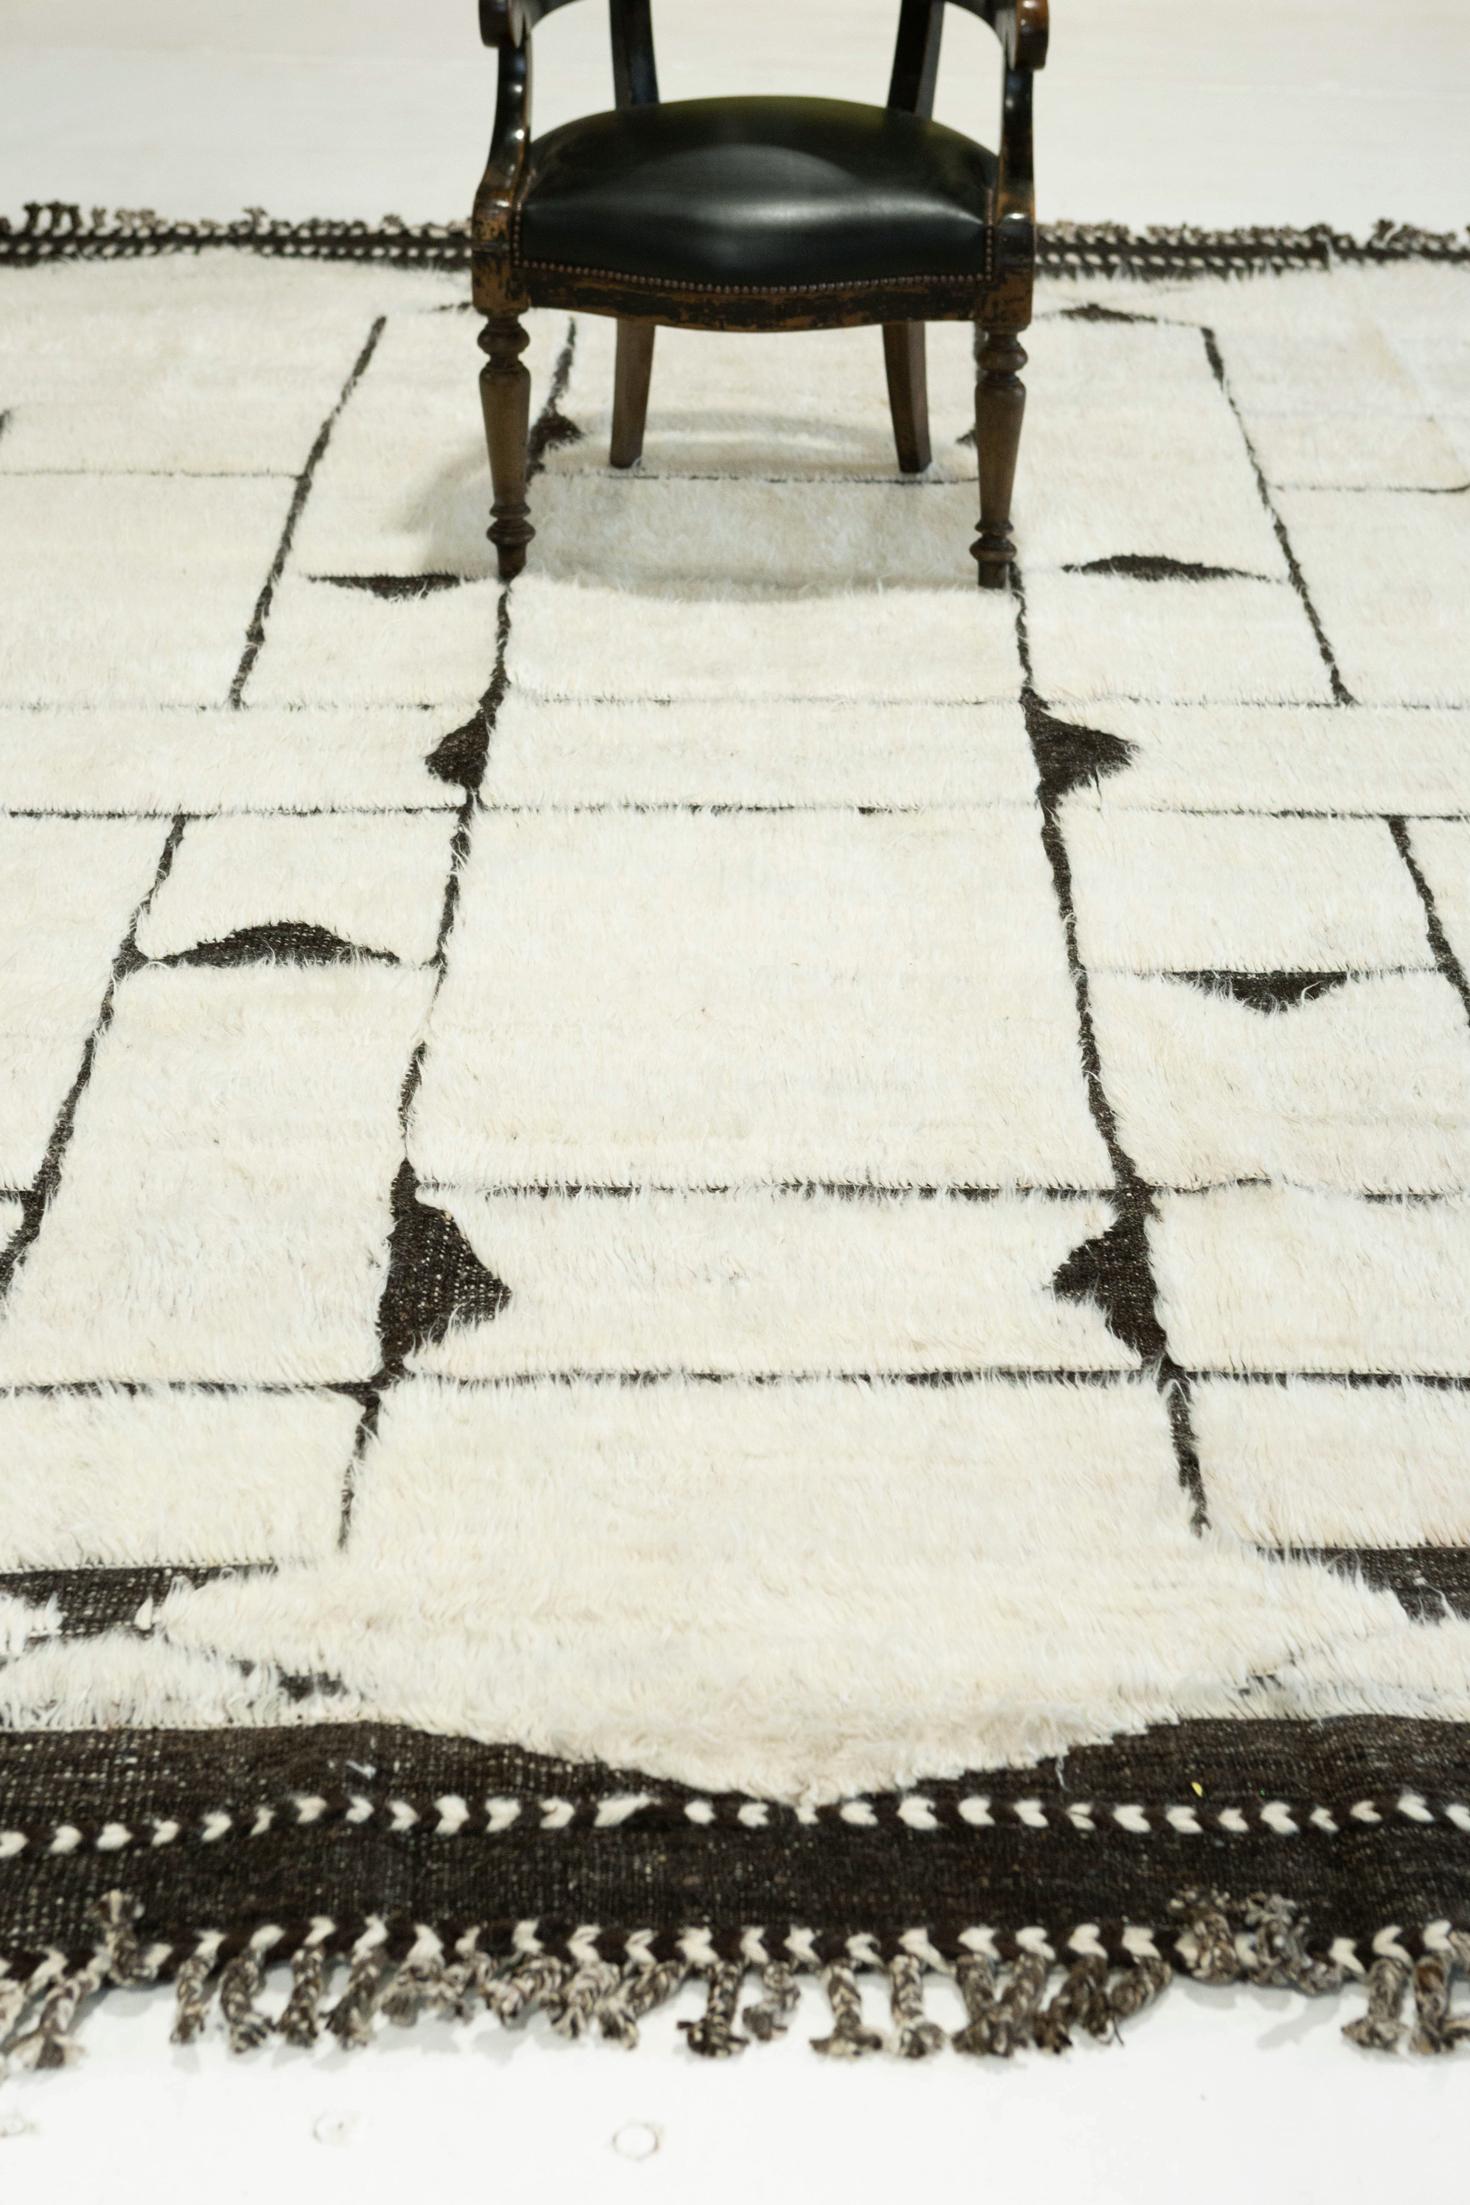 Essaouina' is a beautifully textured rug with embossed designs inspired from the Atlas Mountains of Morocco. Natural black motifs surrounded by ivory shag and tasseled borders make for a great contemporary interpretation for the modern design world.